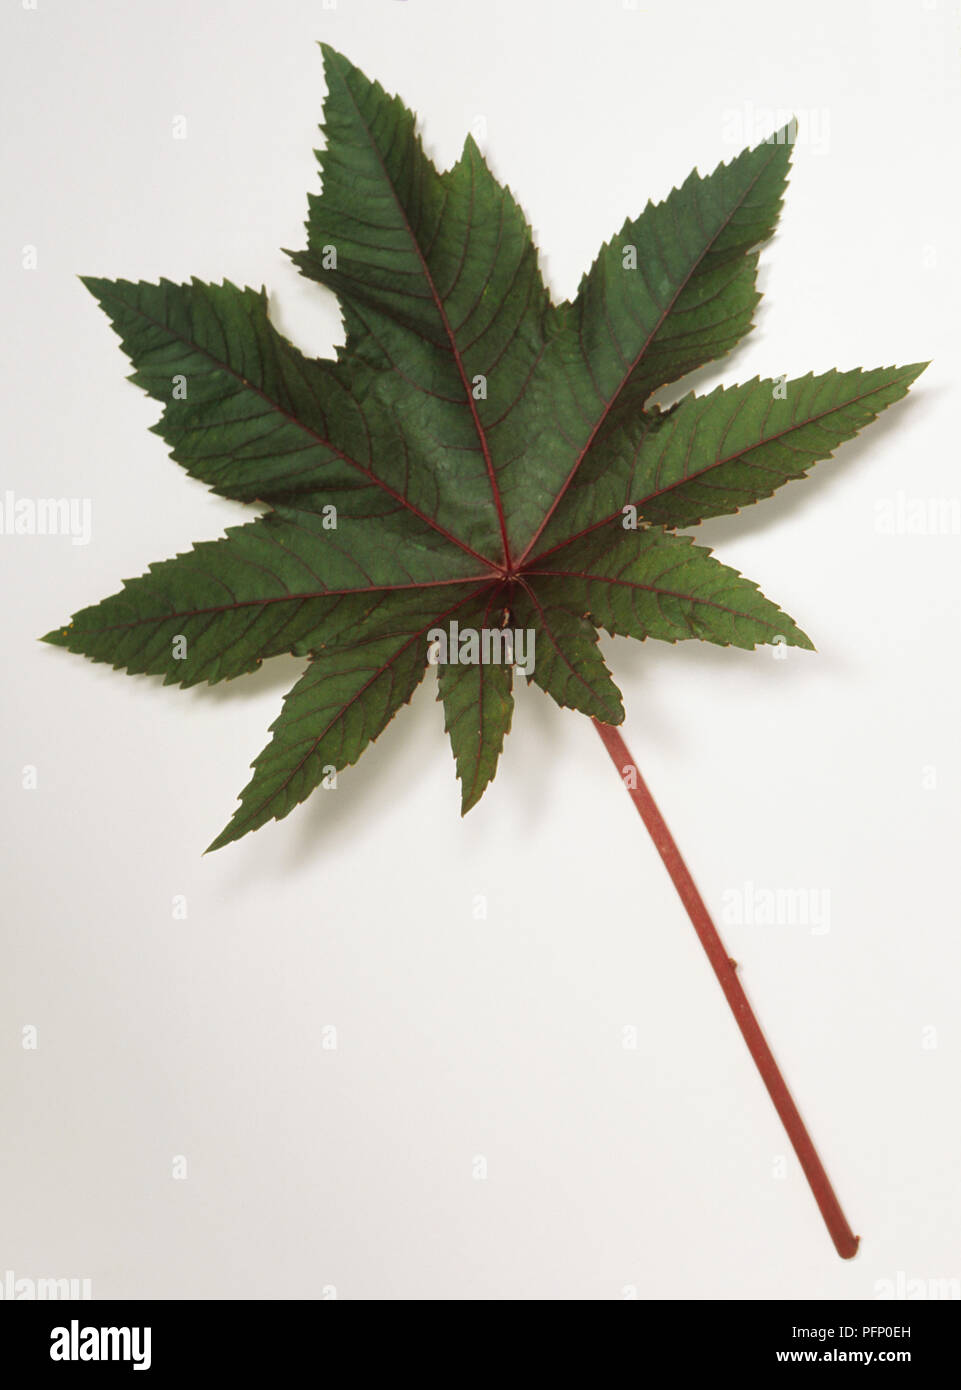 Ricinus communis, Large glossy leaf of castor oil plant with red stem. Stock Photo